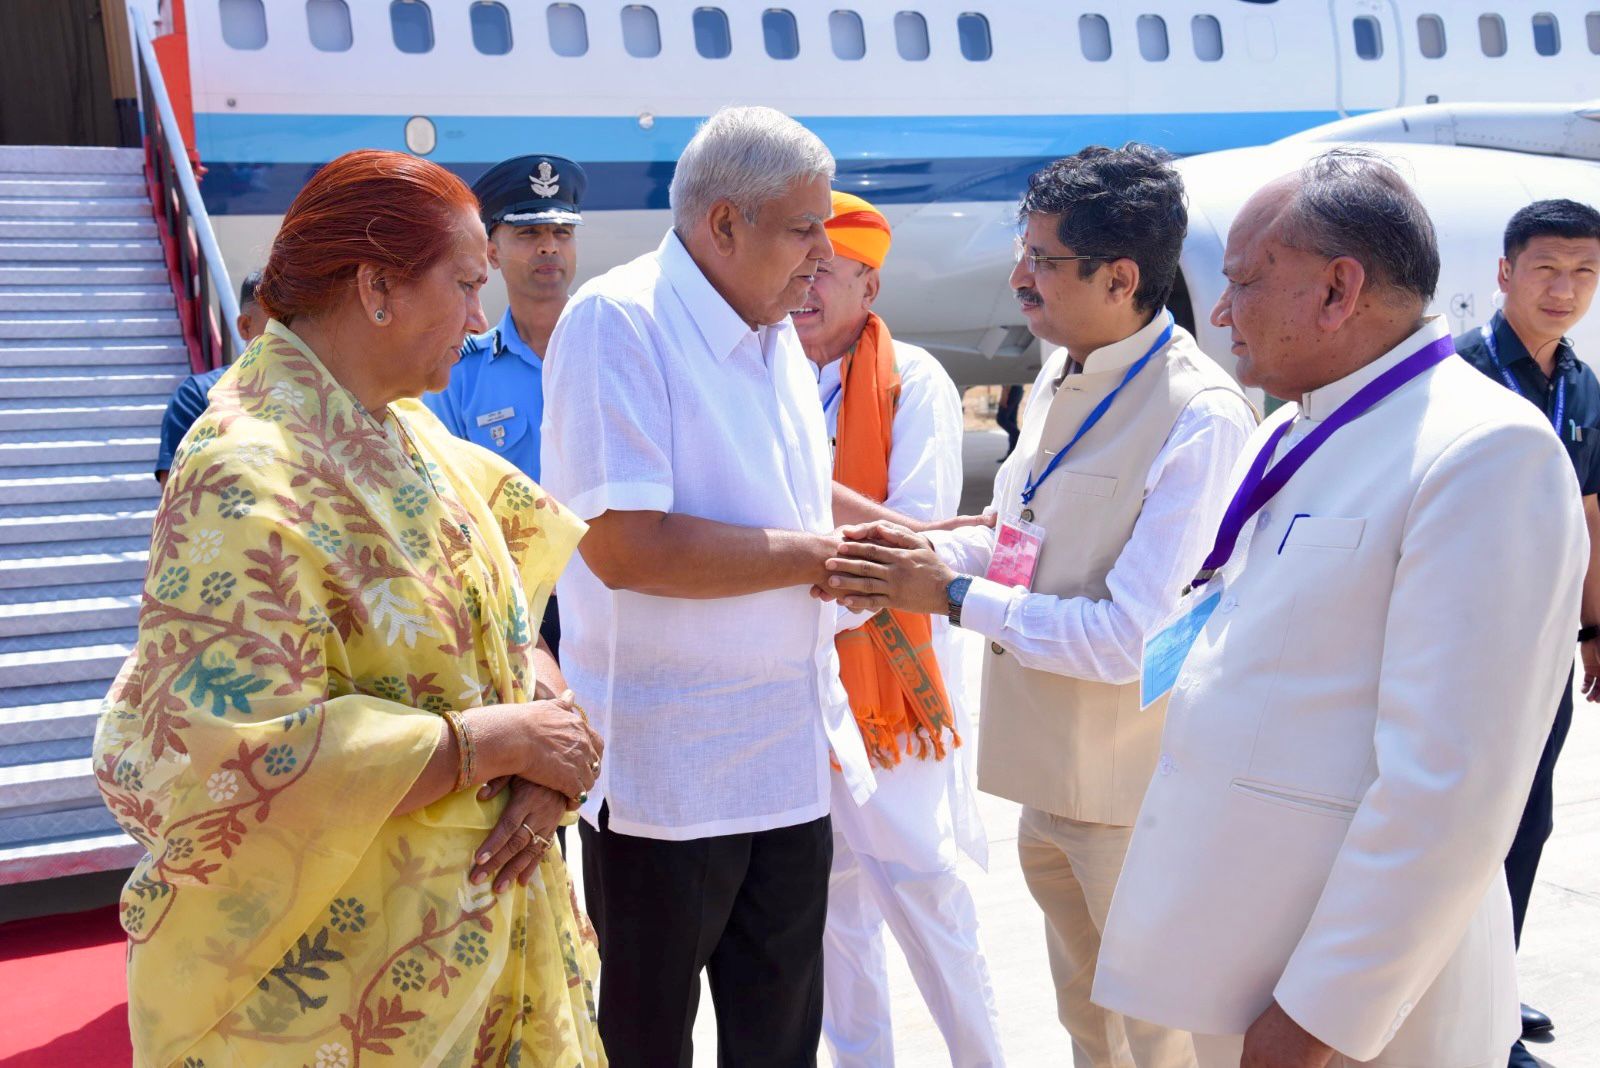  The Vice-President, Shri Jagdeep Dhankhar and Dr. Sudesh Dhankhar being welcomed by Shri Jogaram Patel, Minister, Government of Rajasthan and other dignitaries on their arrival in Jaisalmer, Rajasthan on June 13, 2024.